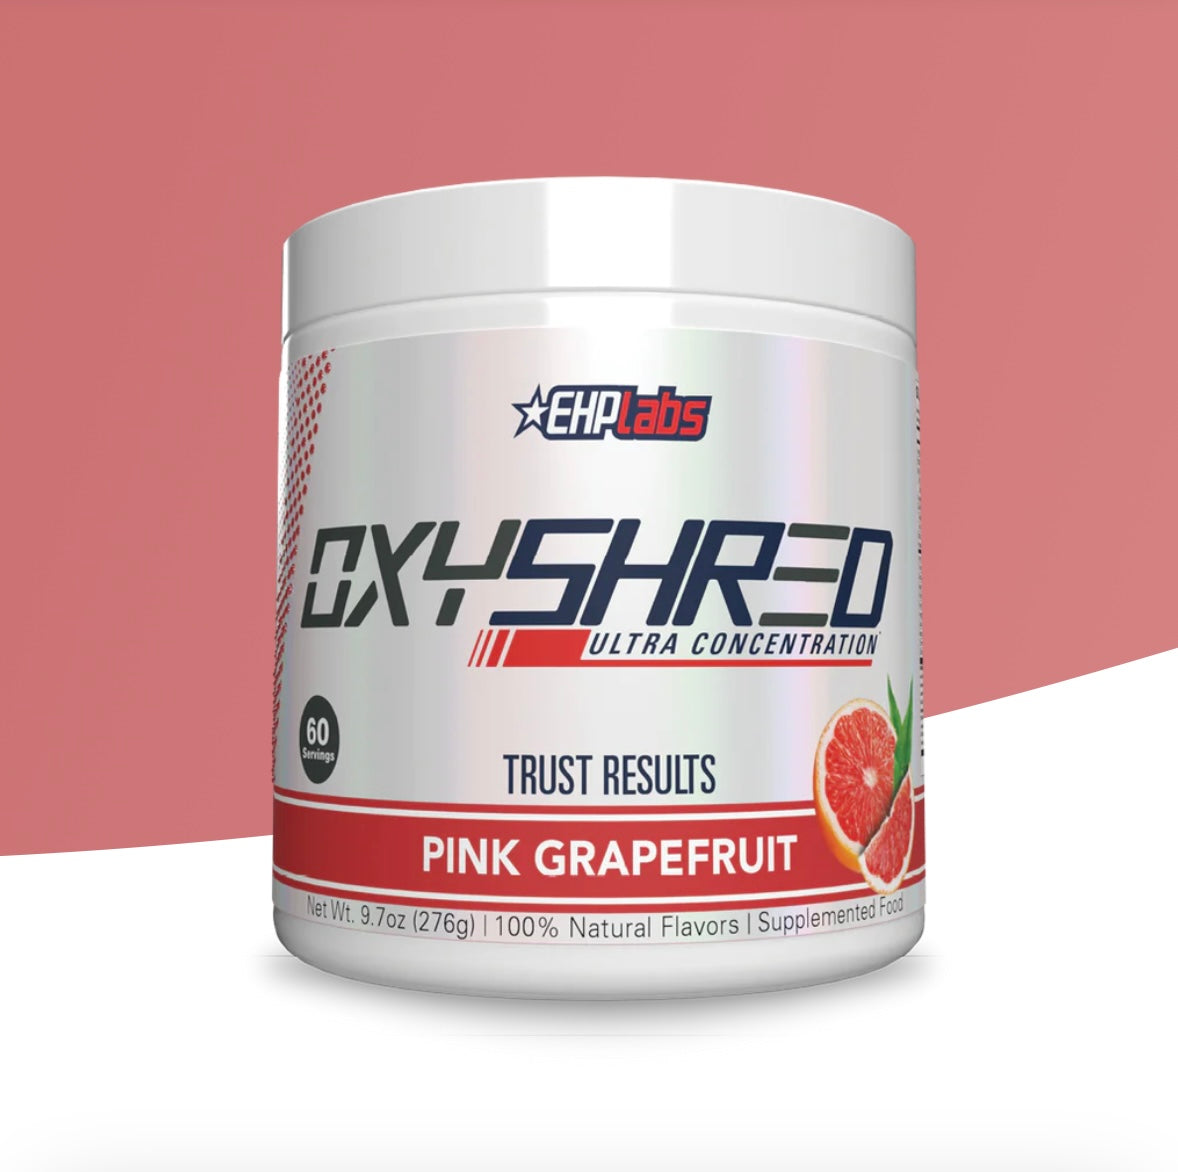 OxyShred Ultra Concentration - Pink Grapefruit